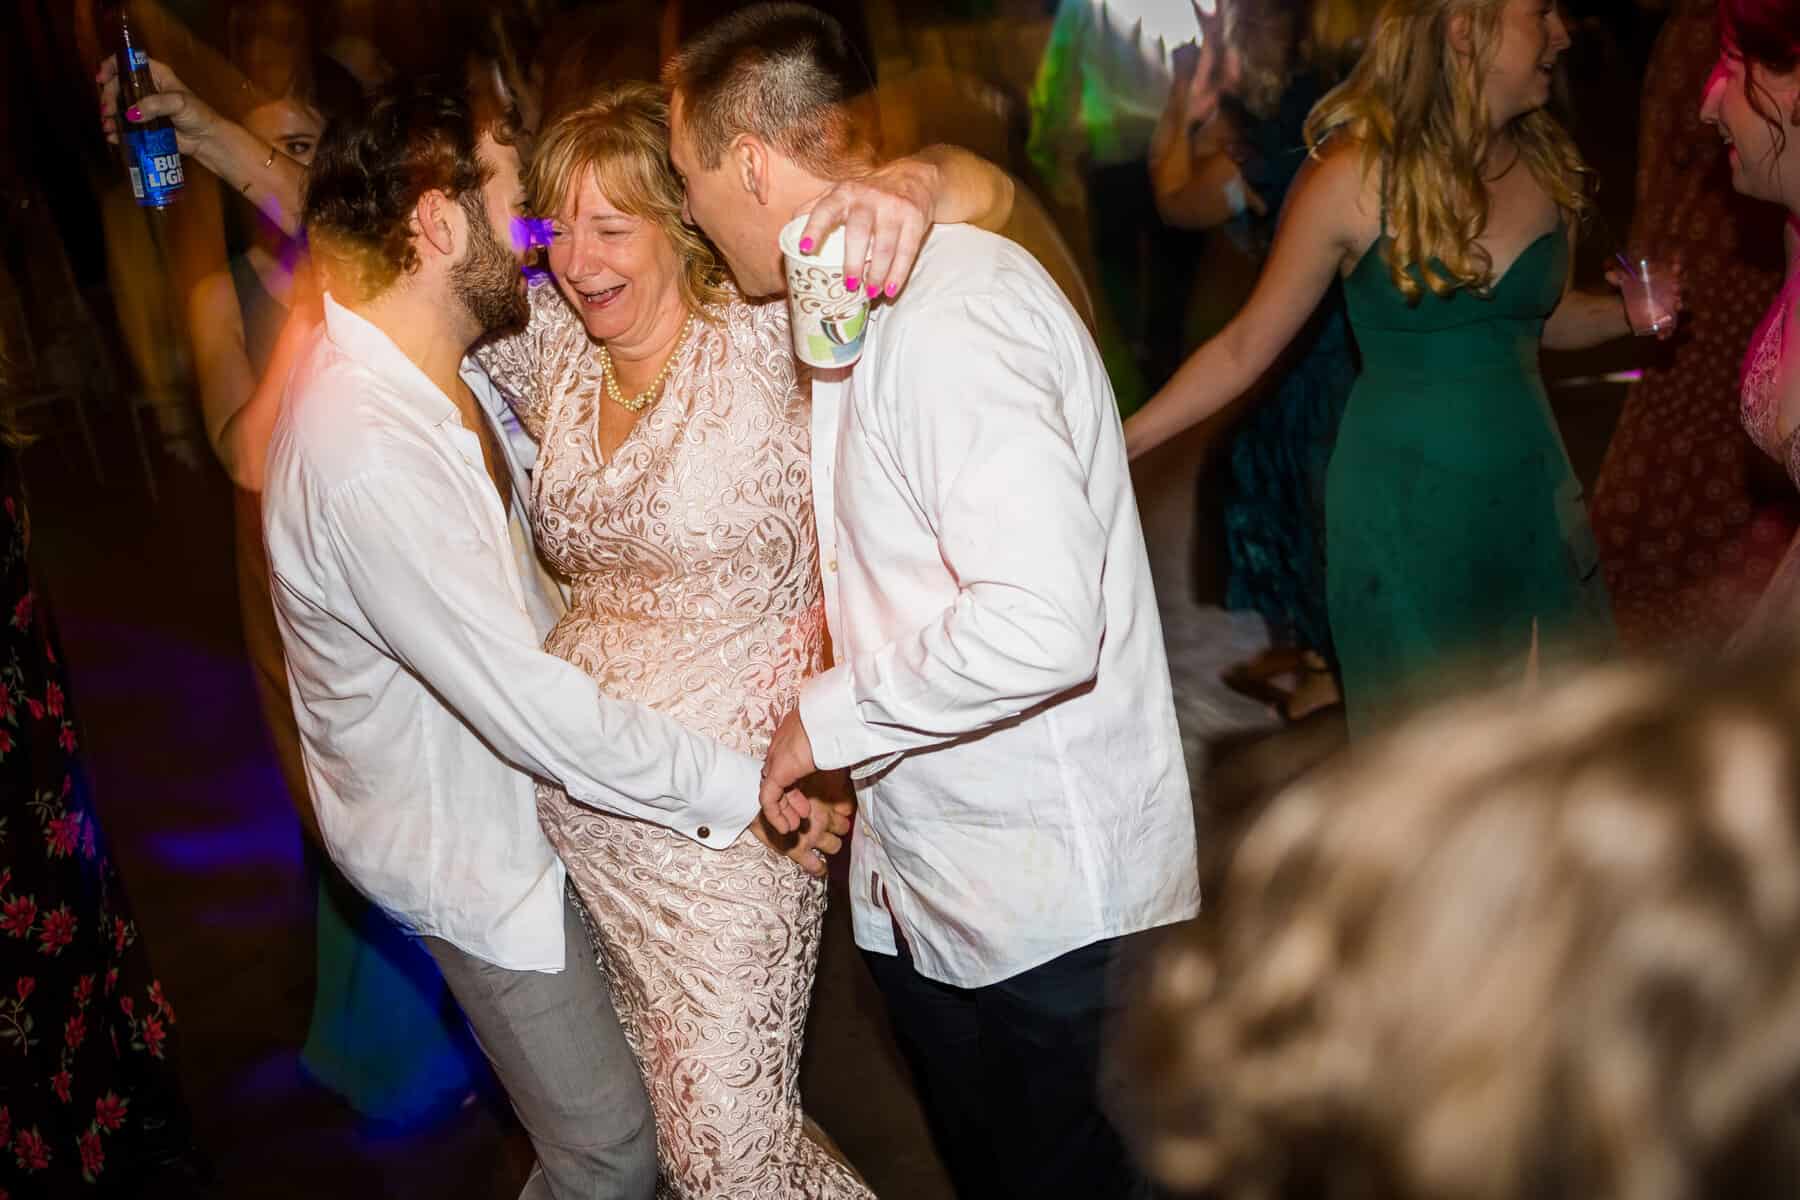 A group of people dancing on the dance floor at a wedding.